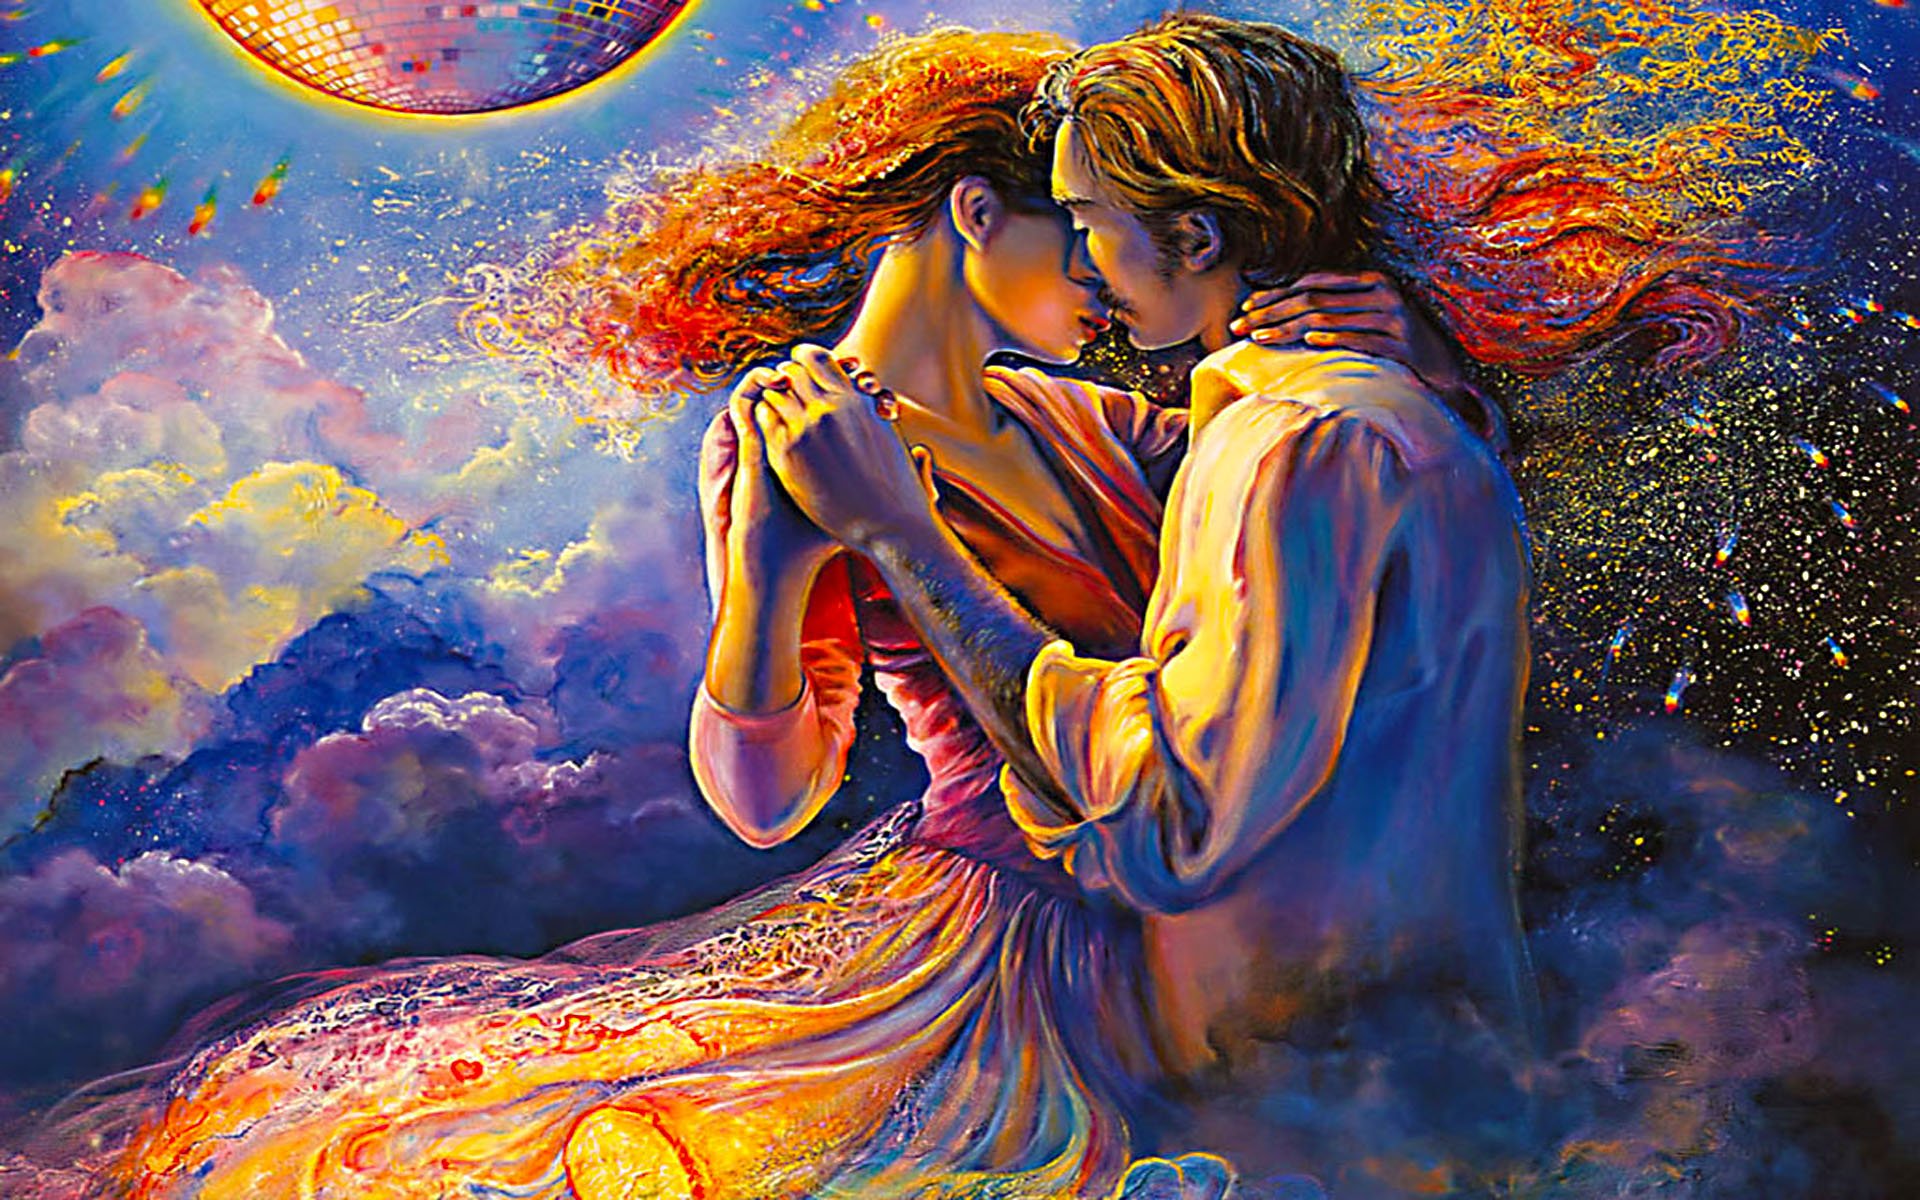 Love Painting Images Hd - 1920x1200 Wallpaper 